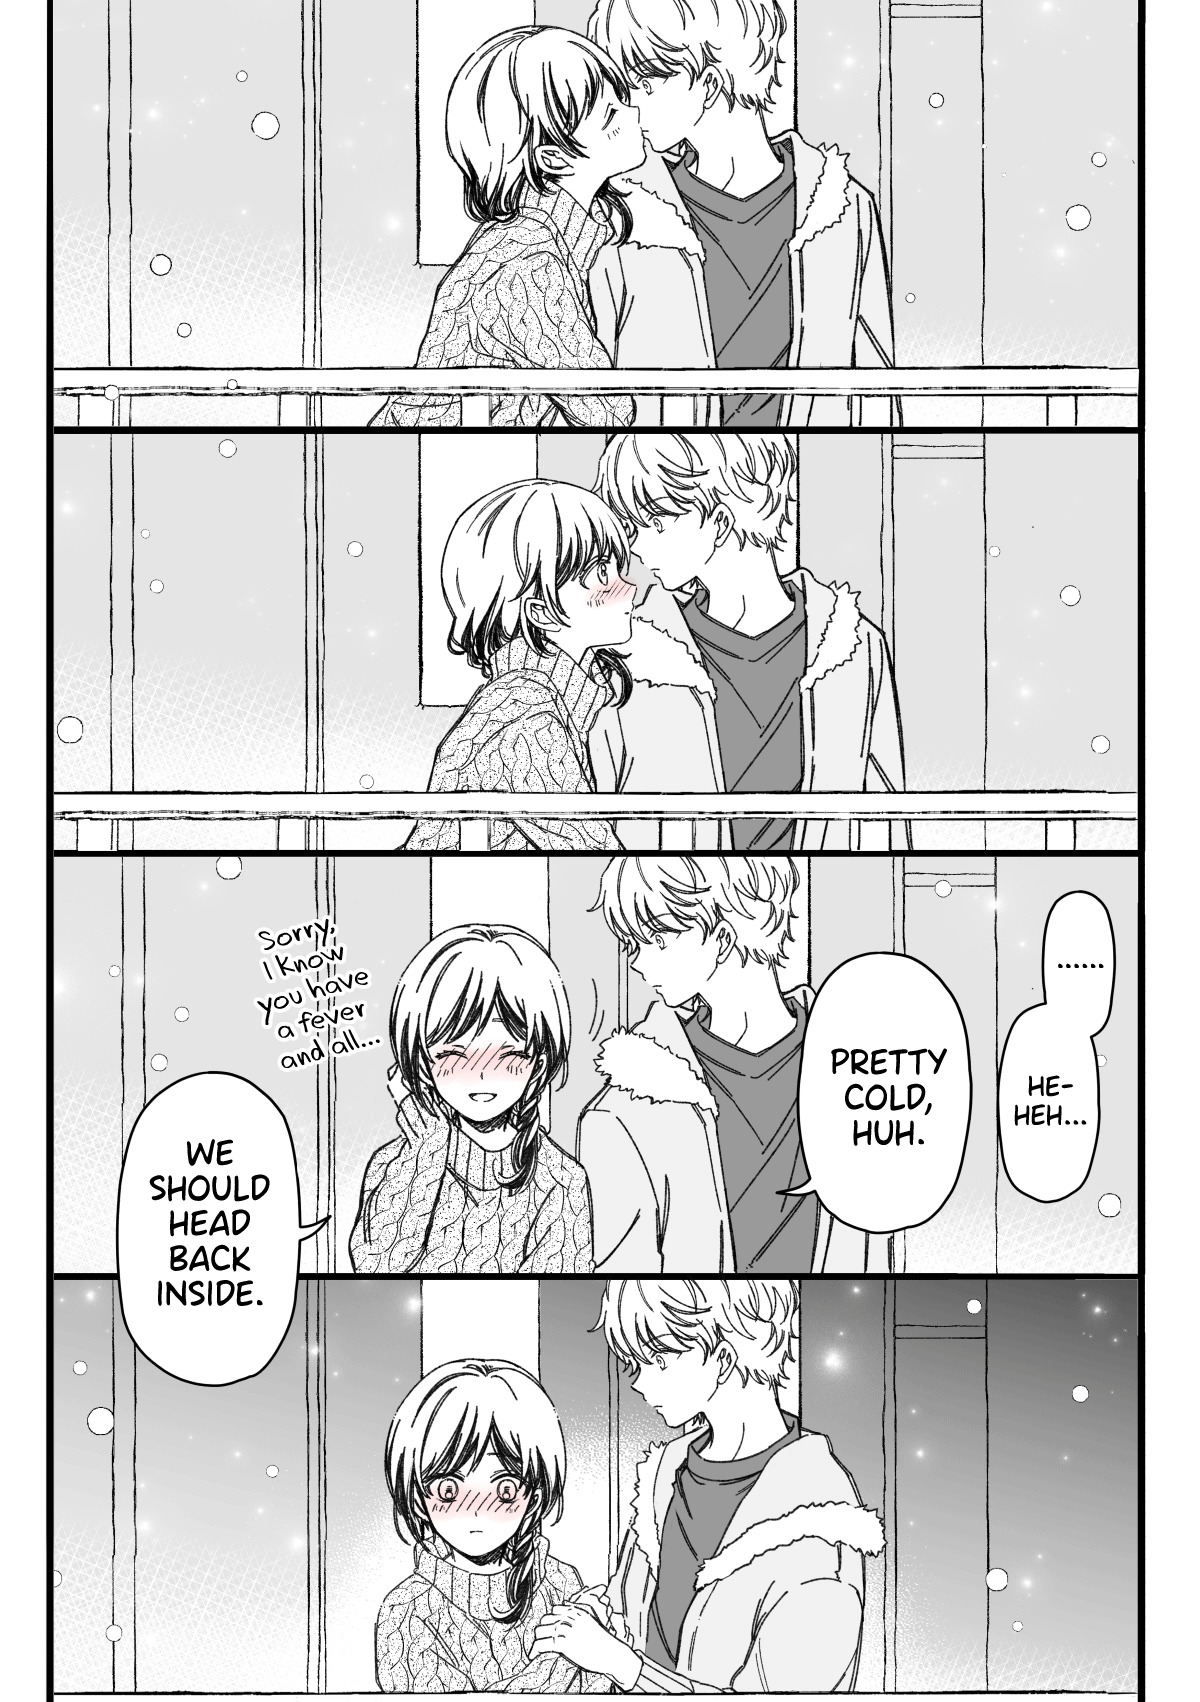 15 Minutes 'Til They Actually Start Dating vol.3 ch.22.2